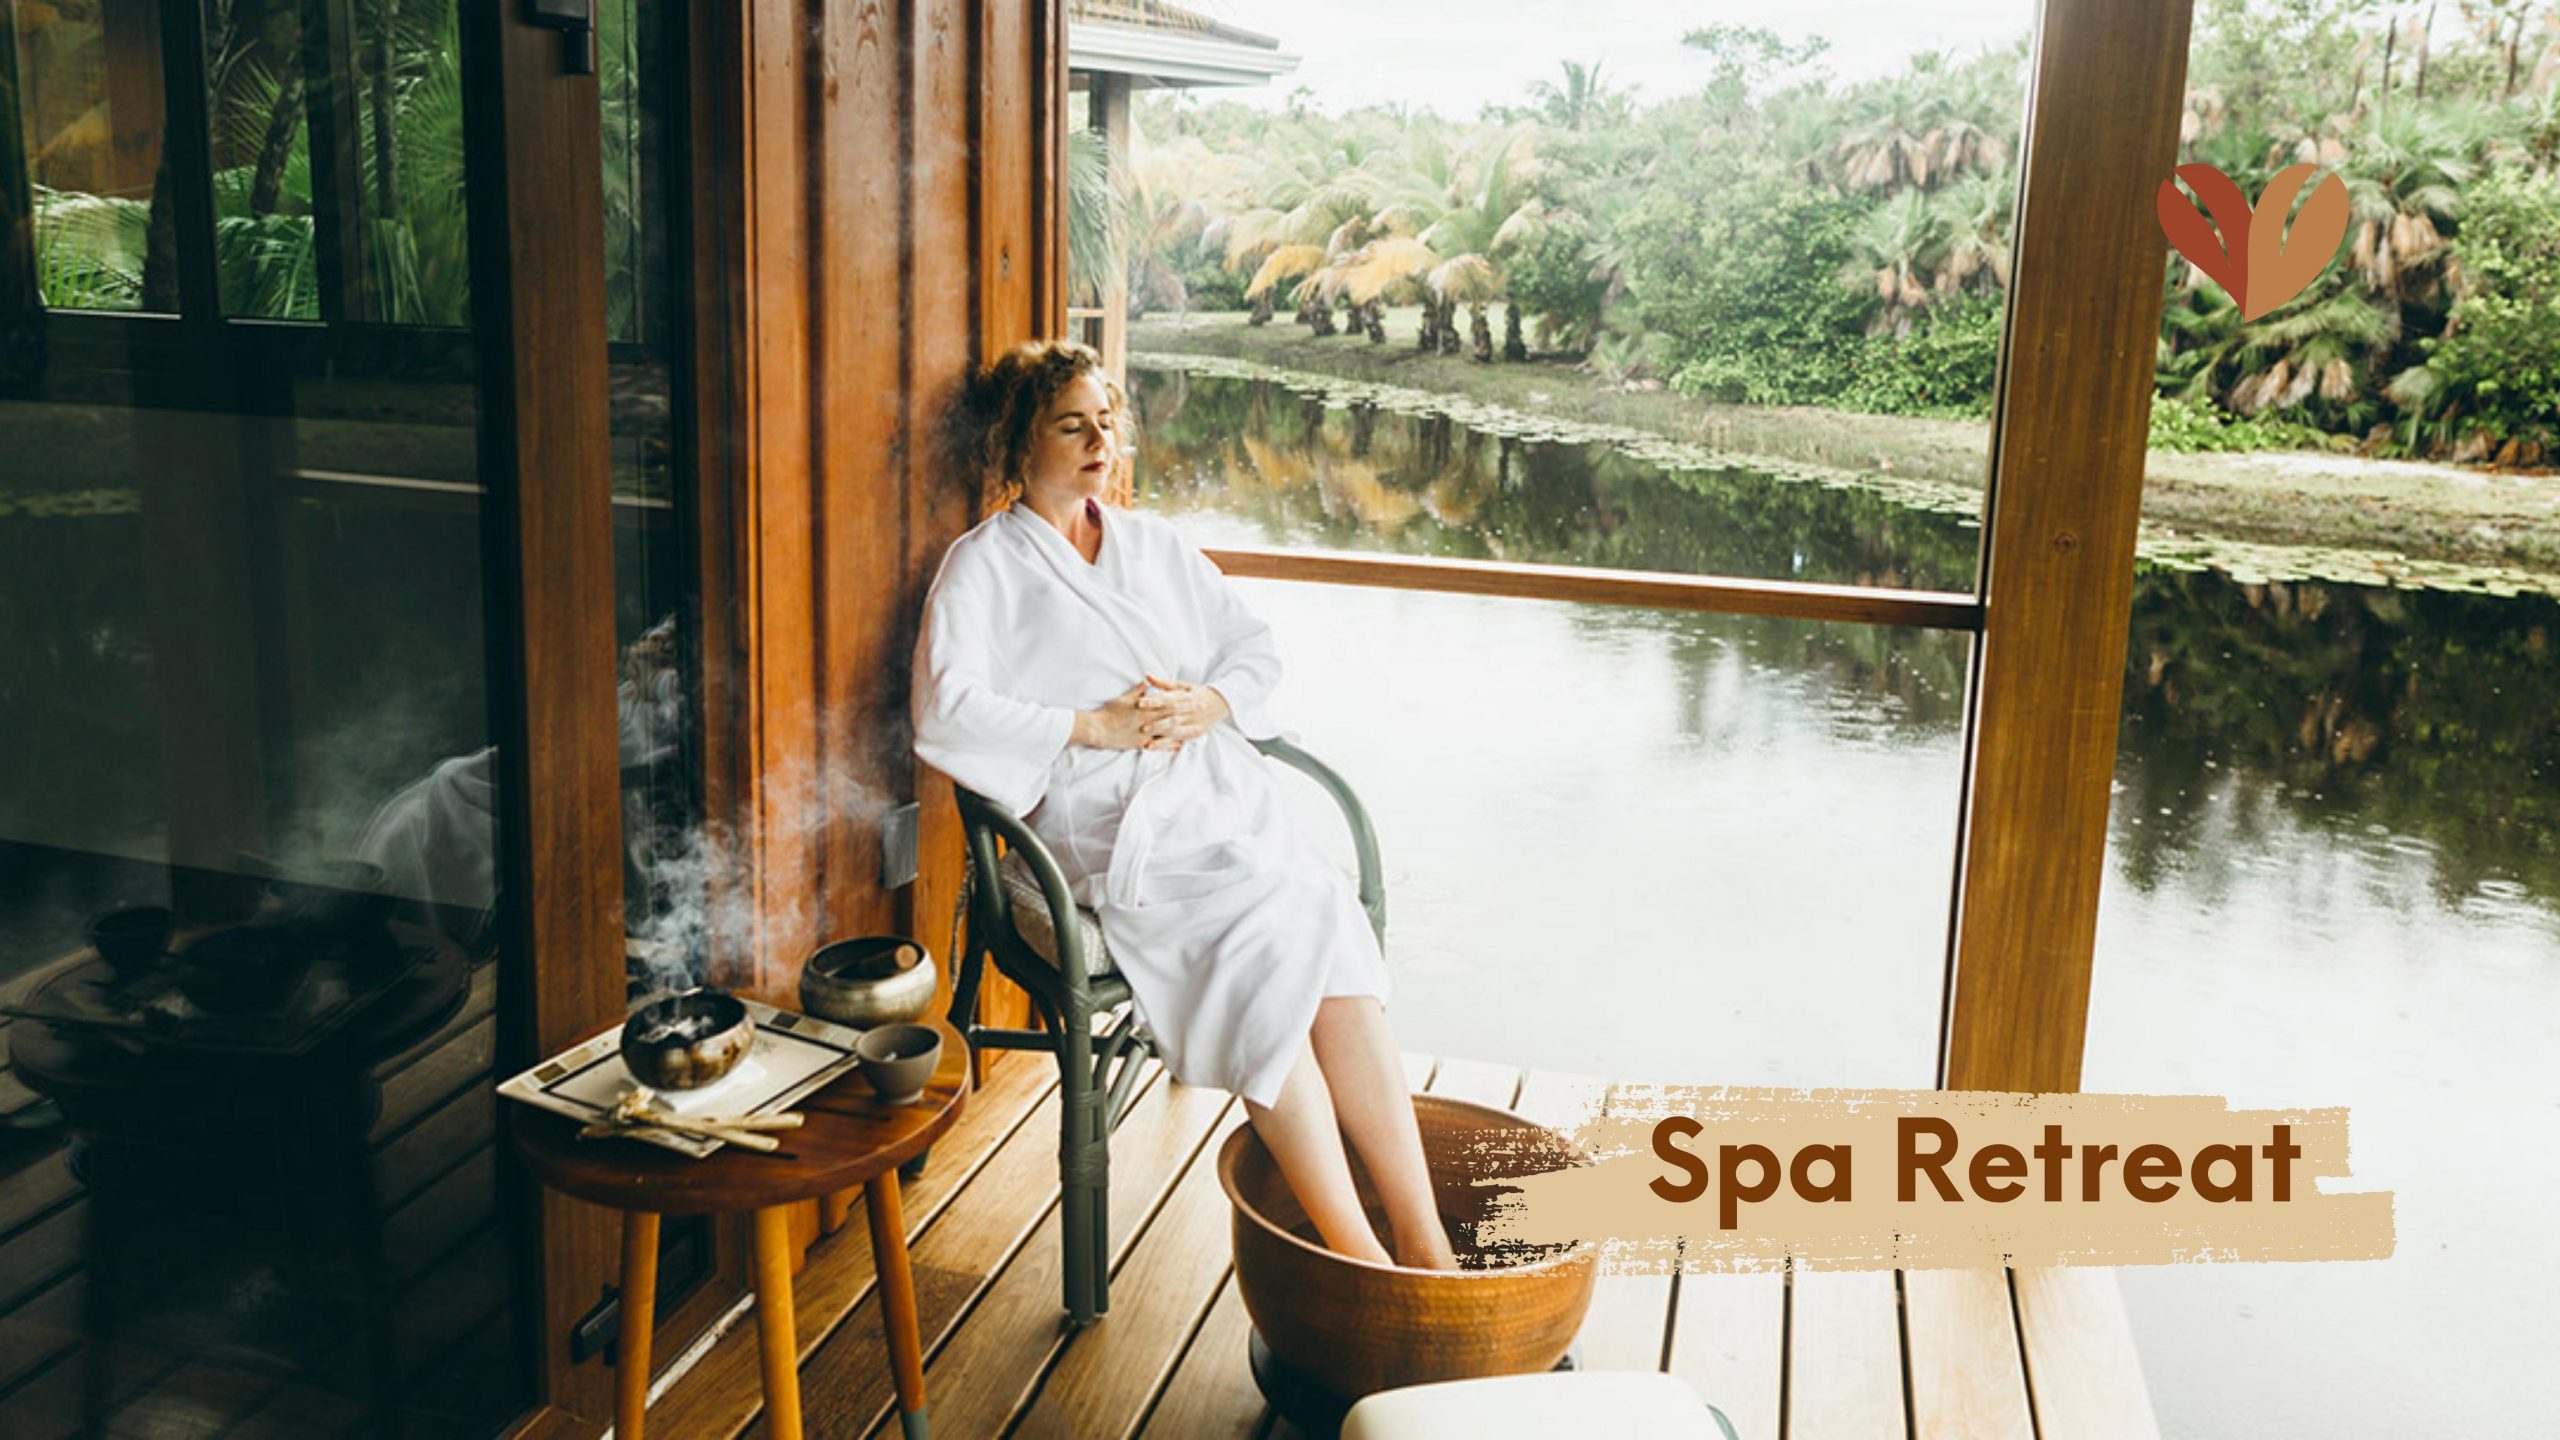 Spa retreat is a 5th anniversary gifts that makes her feel relaxed